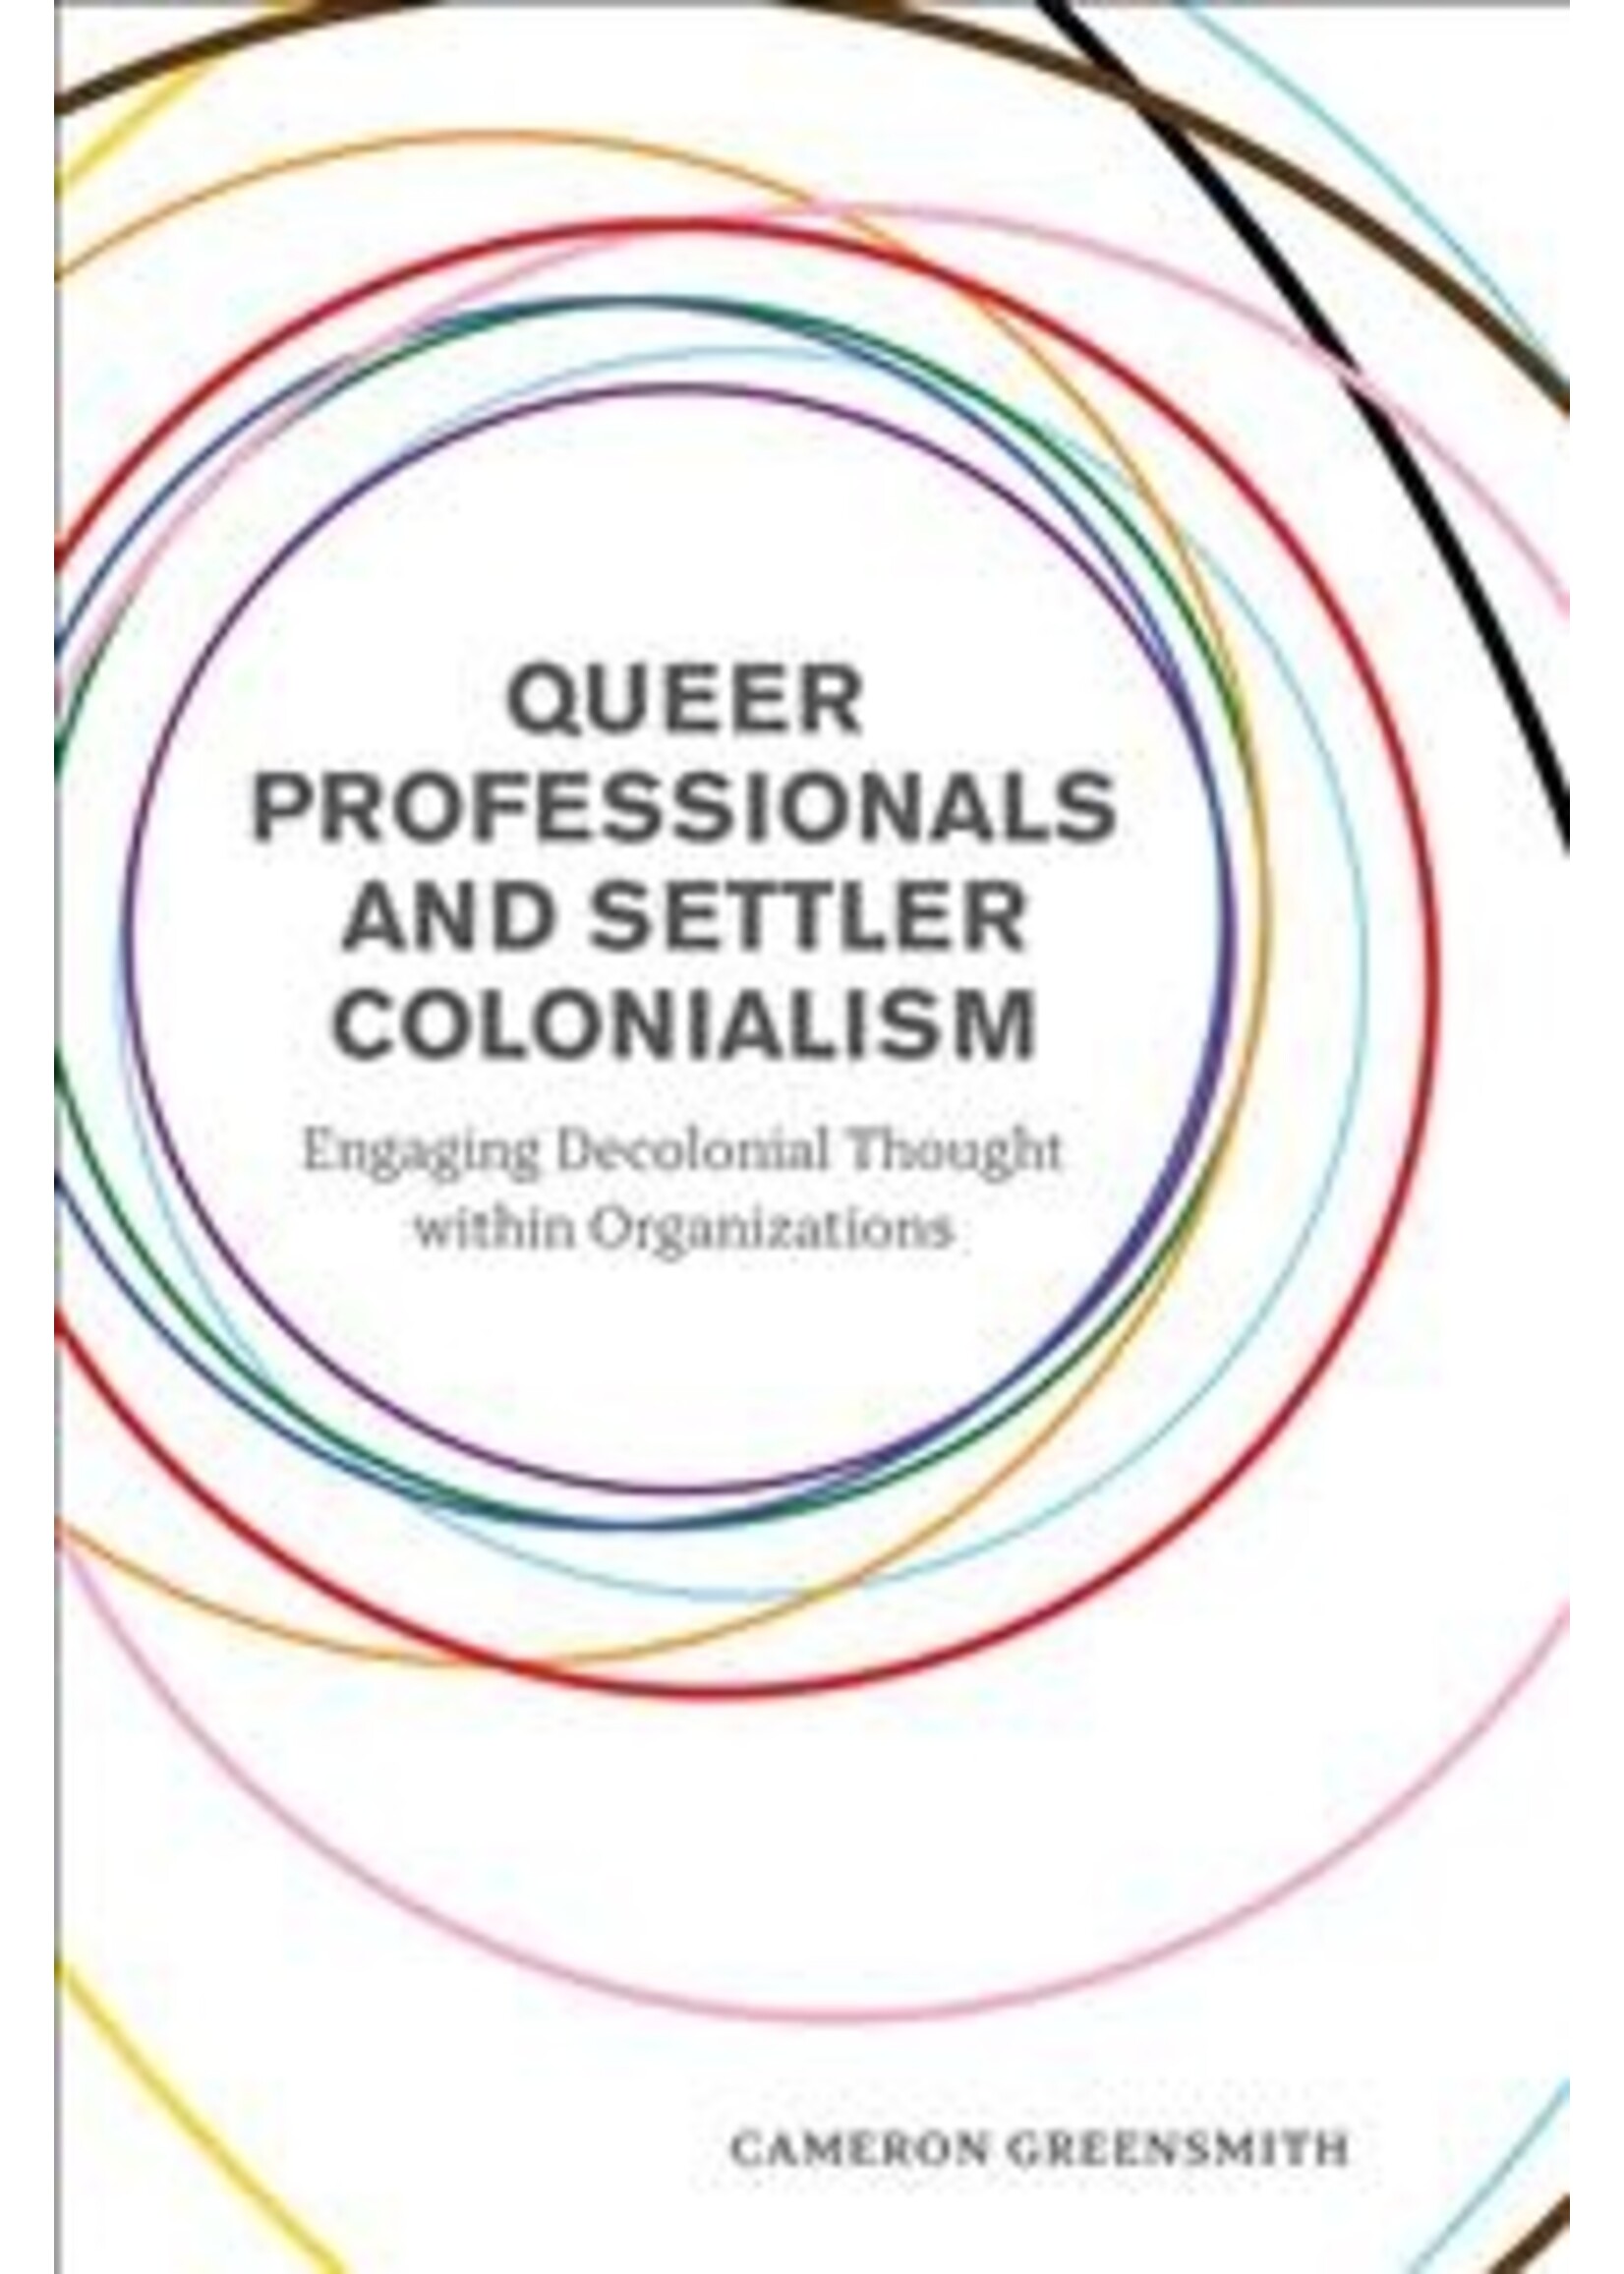 Queer Professionals and Settler Colonialism: Engaging Decolonial Thought within Organizations by Cameron Greensmith